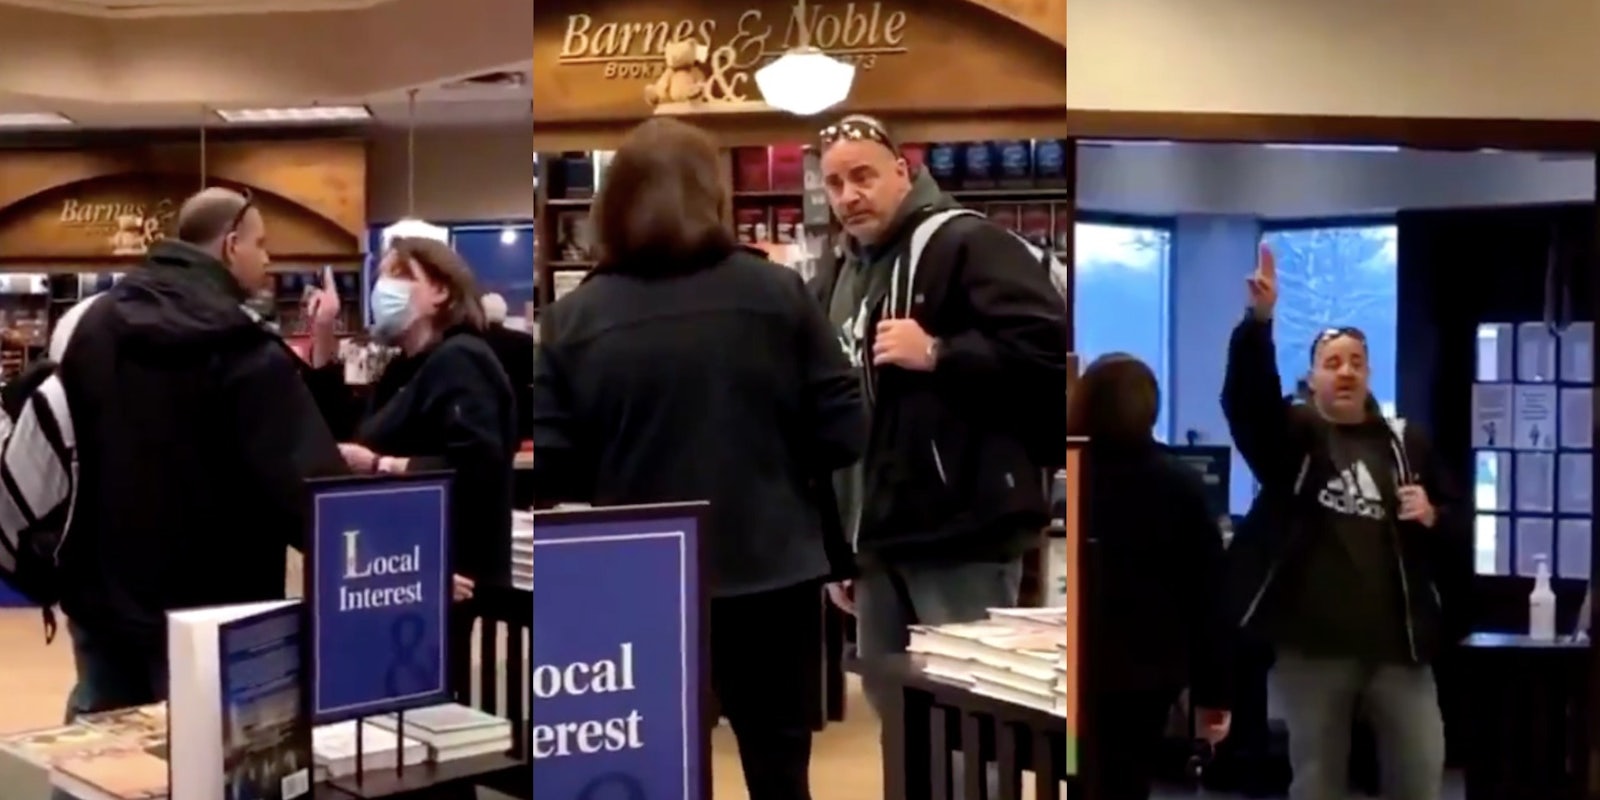 Male Karen harasses Barnes and Noble employee who tells him to wear mask